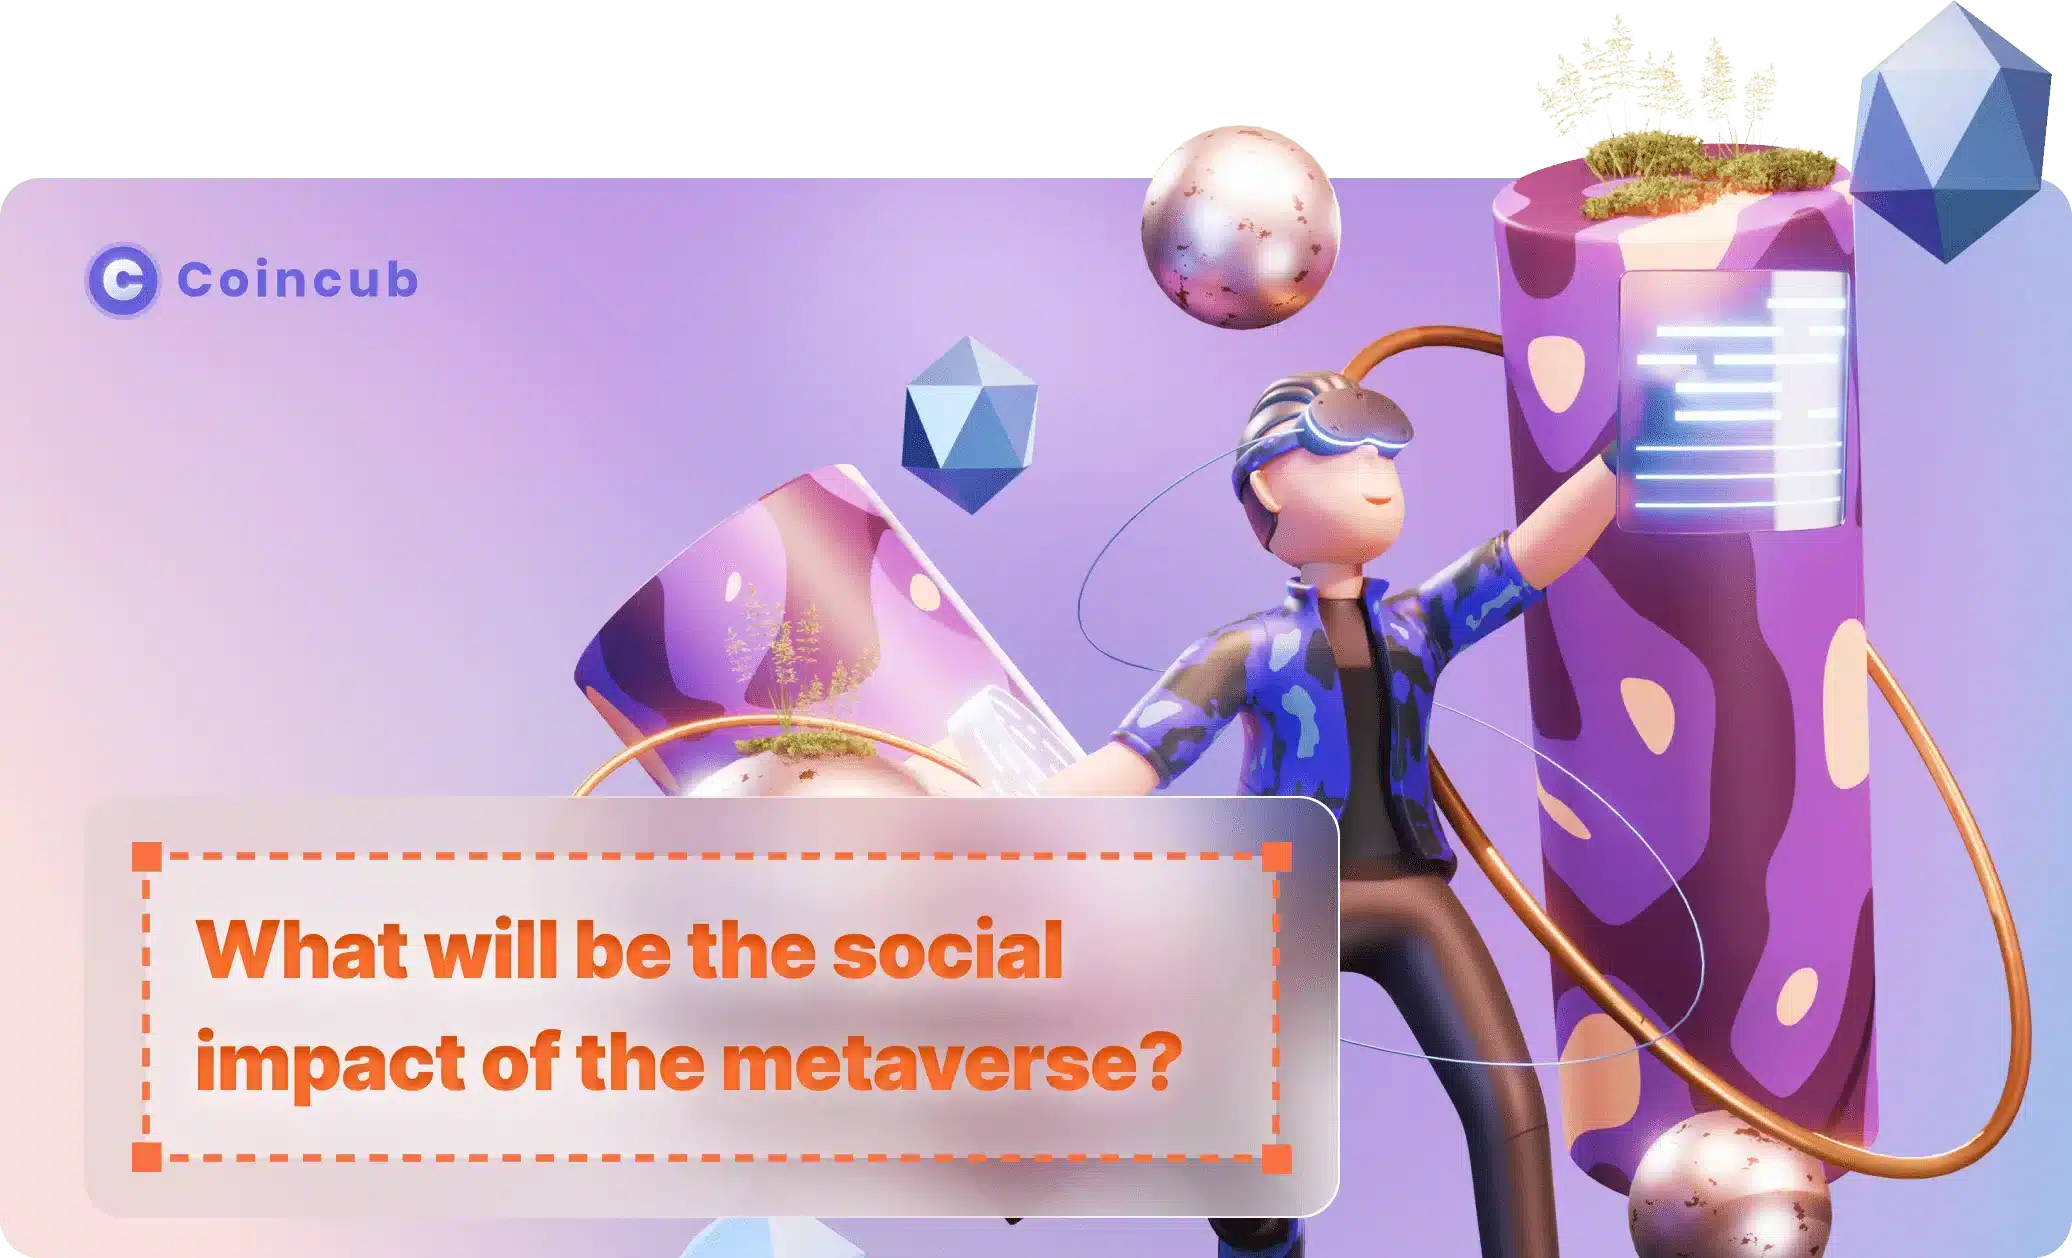 What will be the social impact of the metaverse